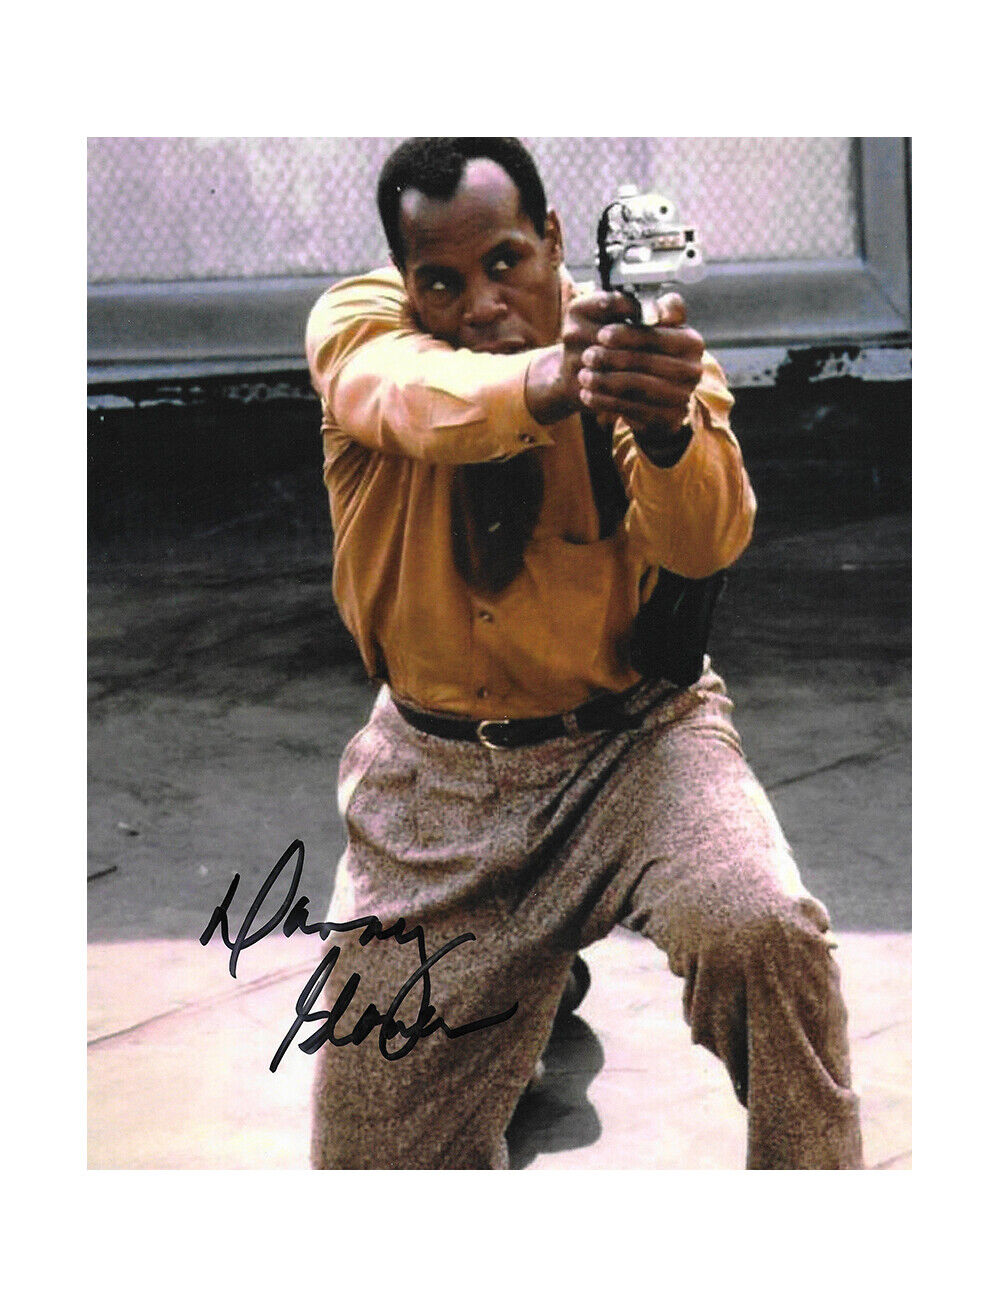 8x10 Predator 2 Print Signed by Danny Glover 100% Authentic + COA